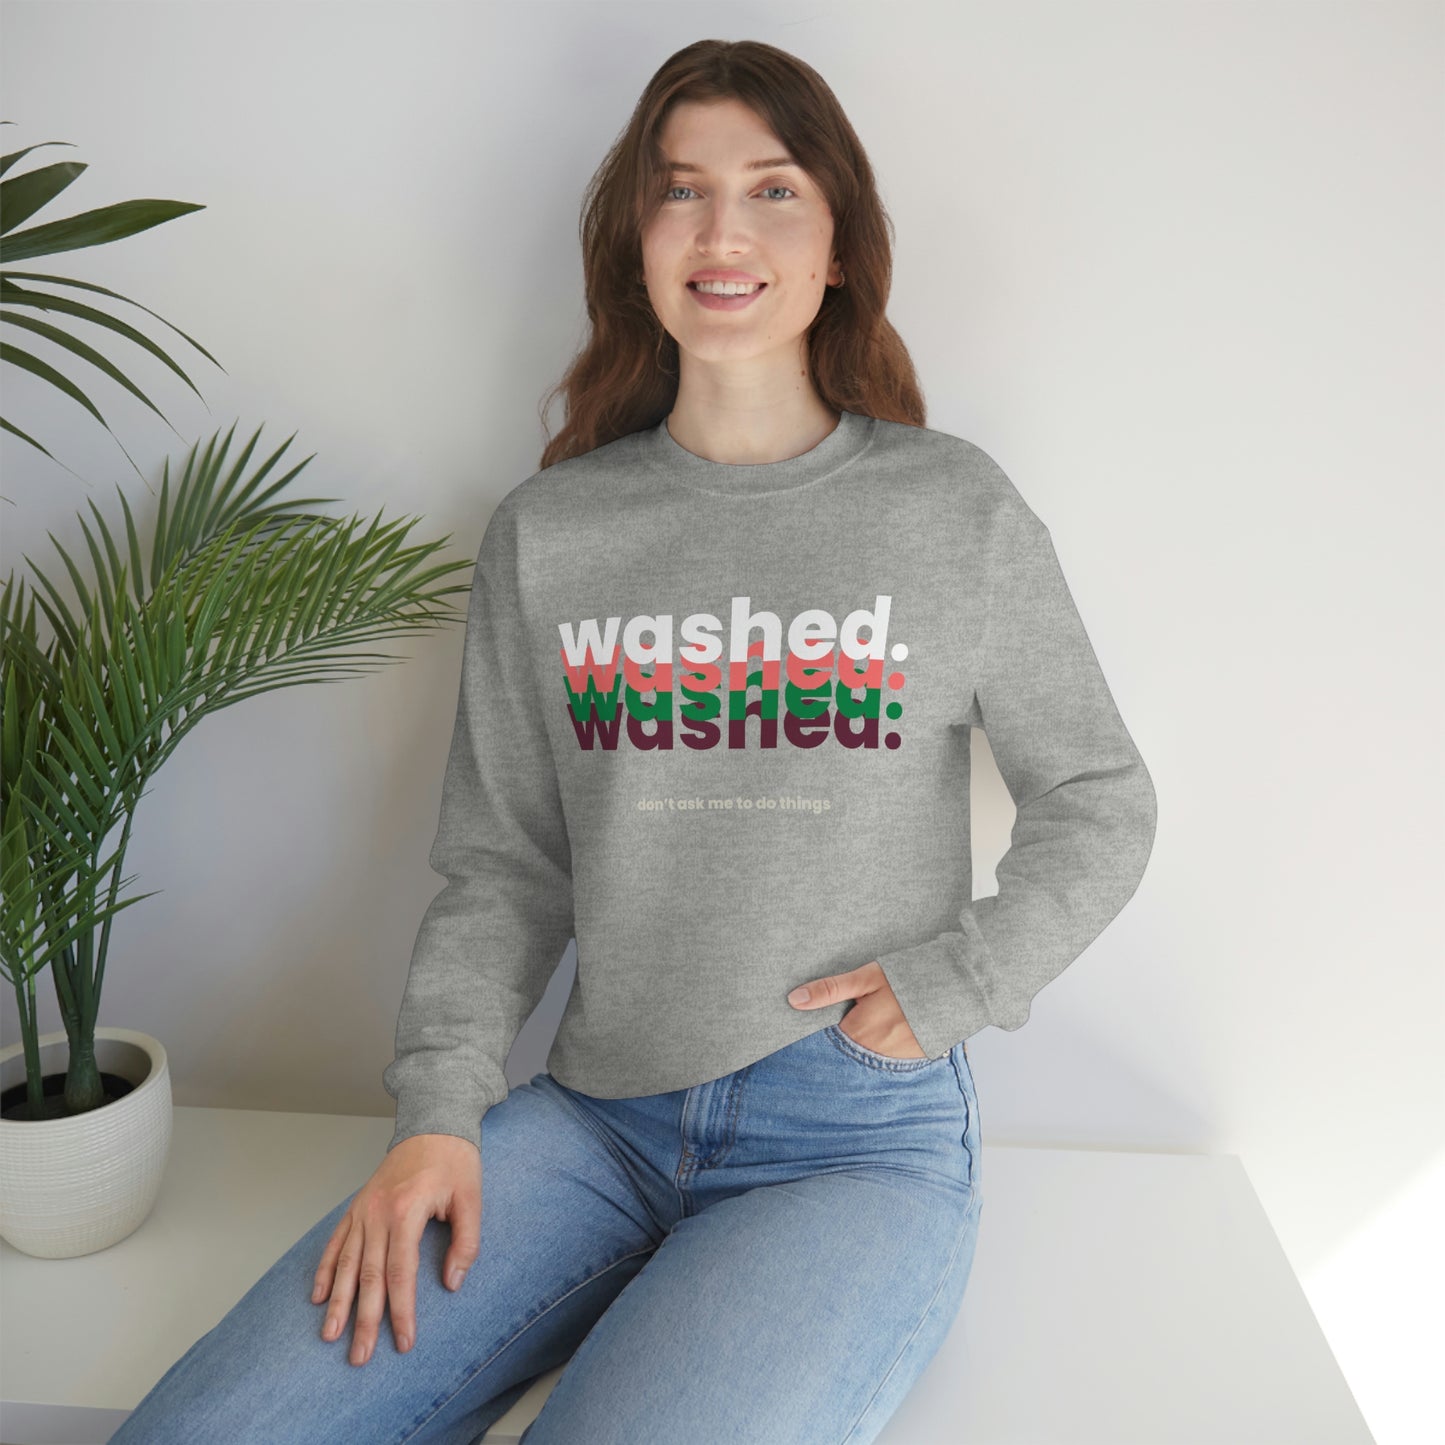 WASHED Sweatshirt | Don't Ask Me to Do Things Pullover